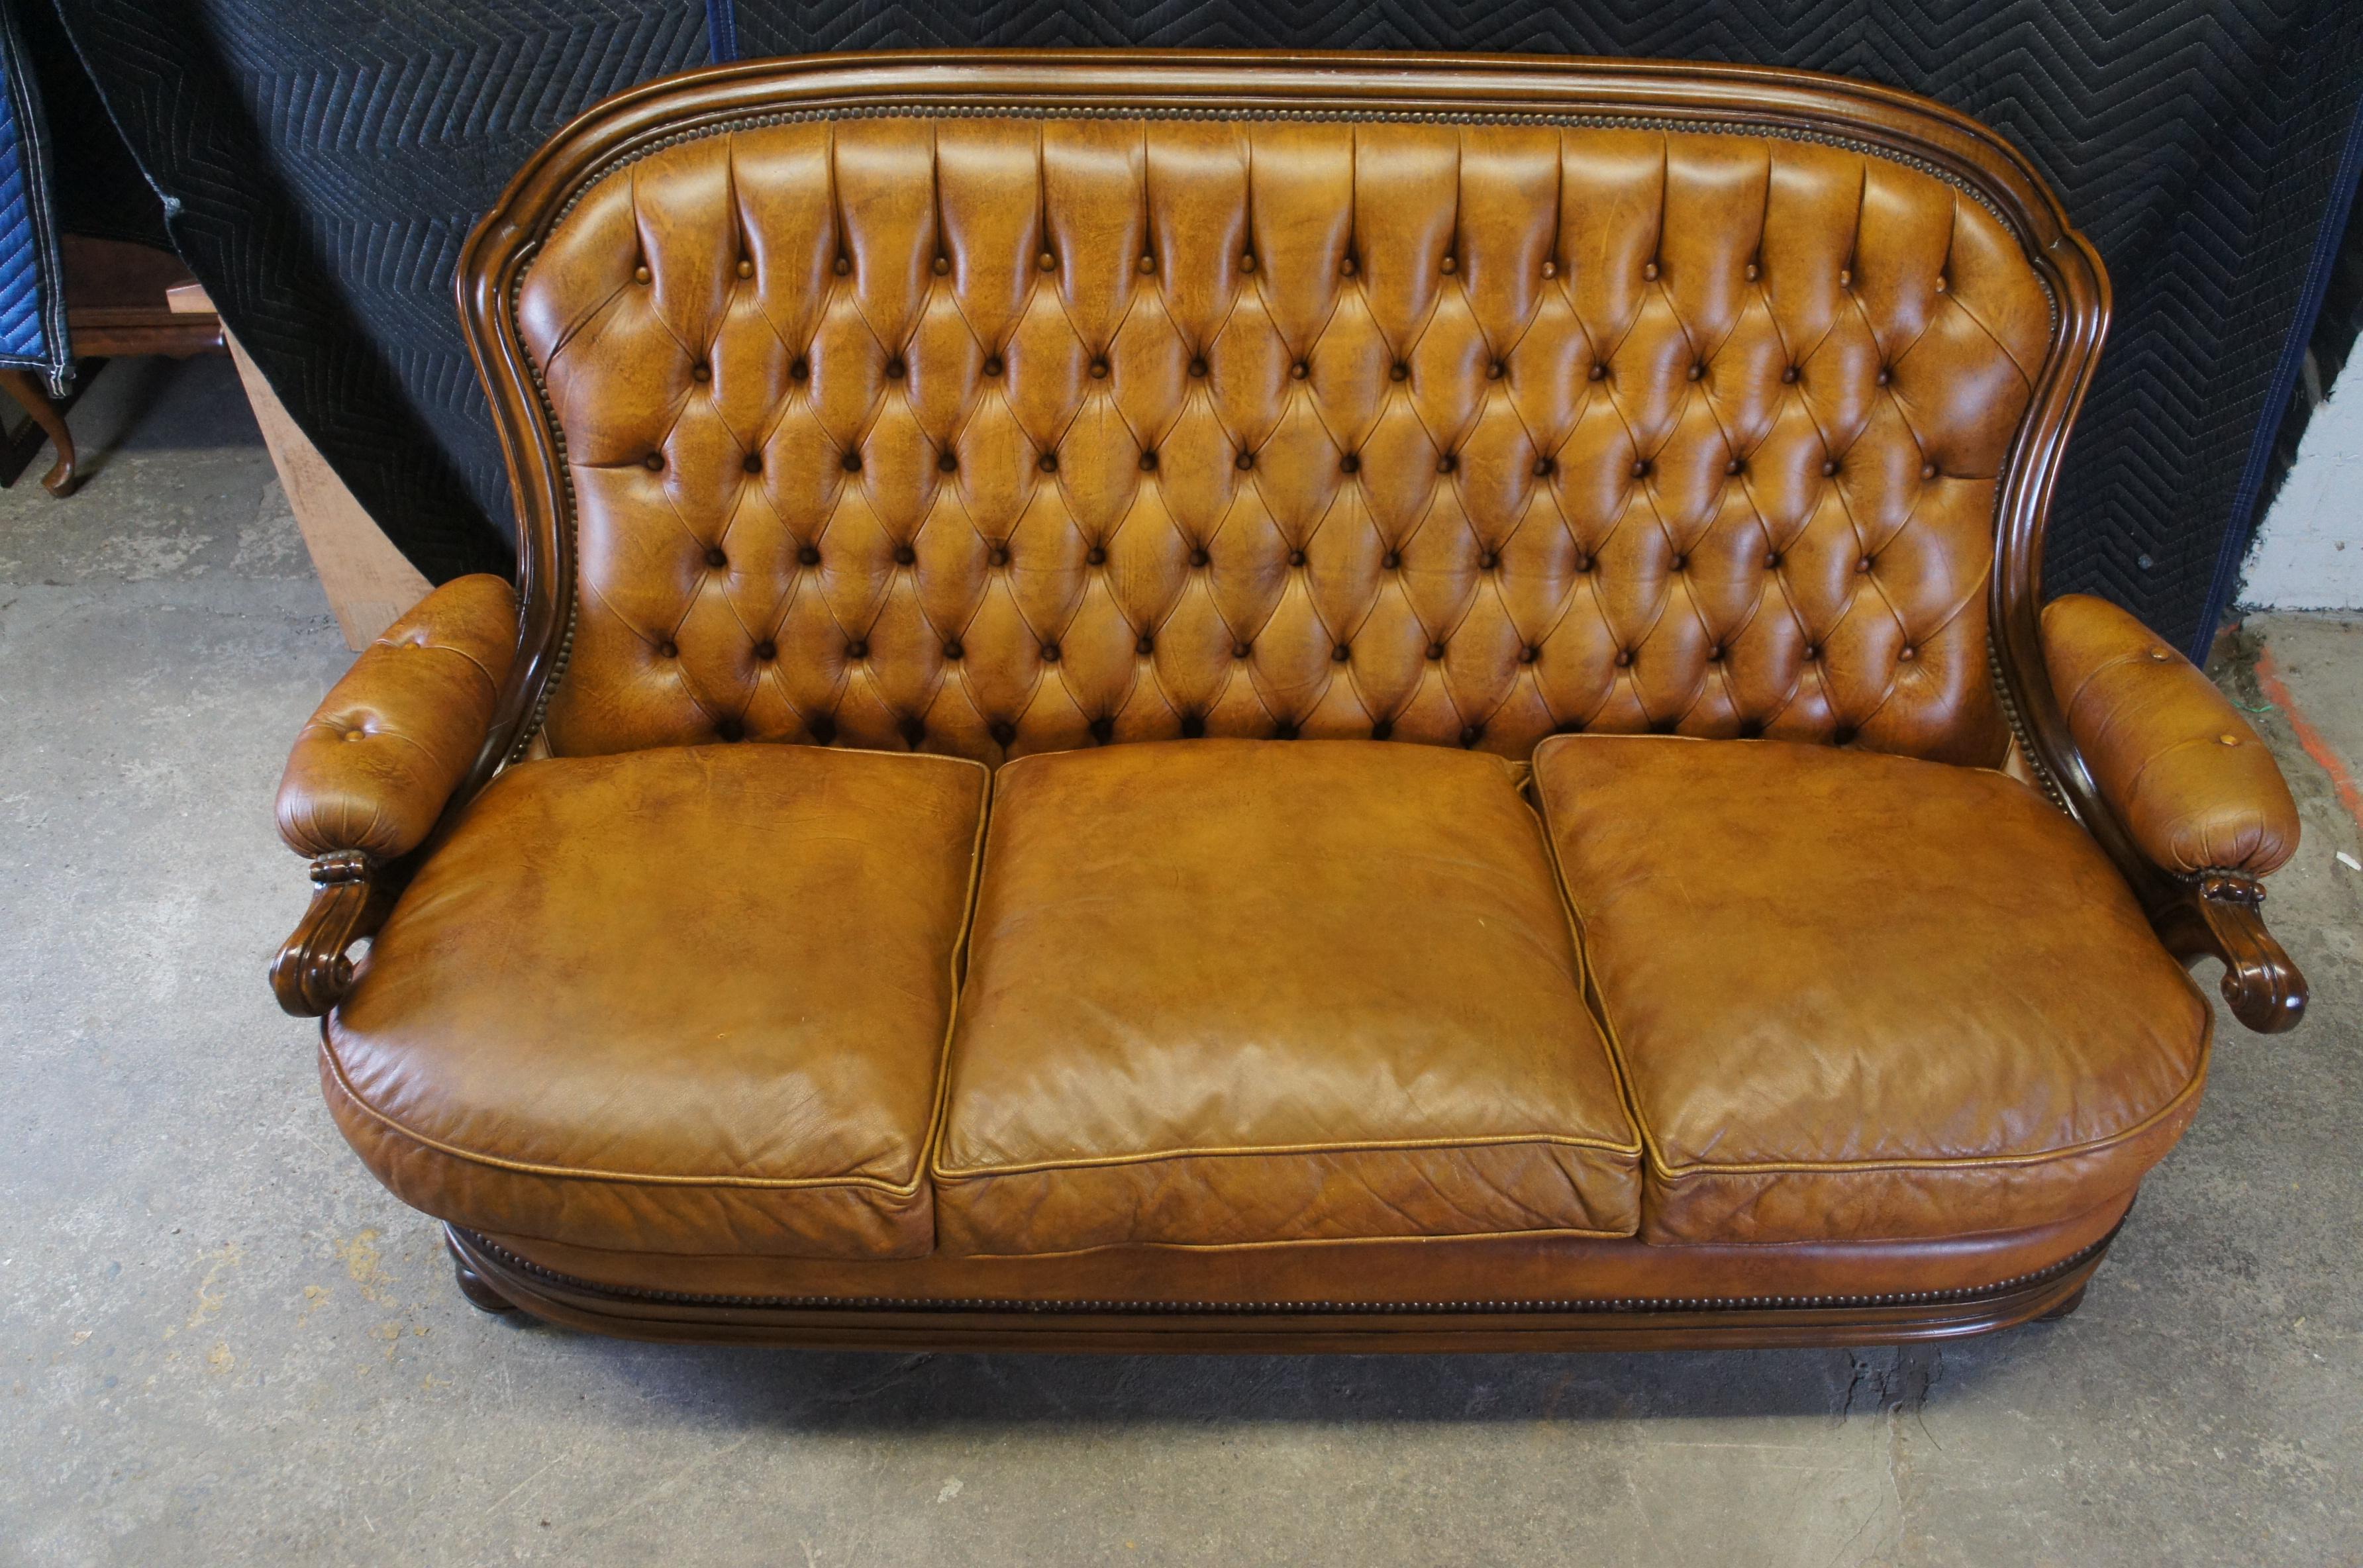 20th Century Vintage Italian Fruitwood Tufted Leather Nailhead 3 Seat Library Sofa Couch 77